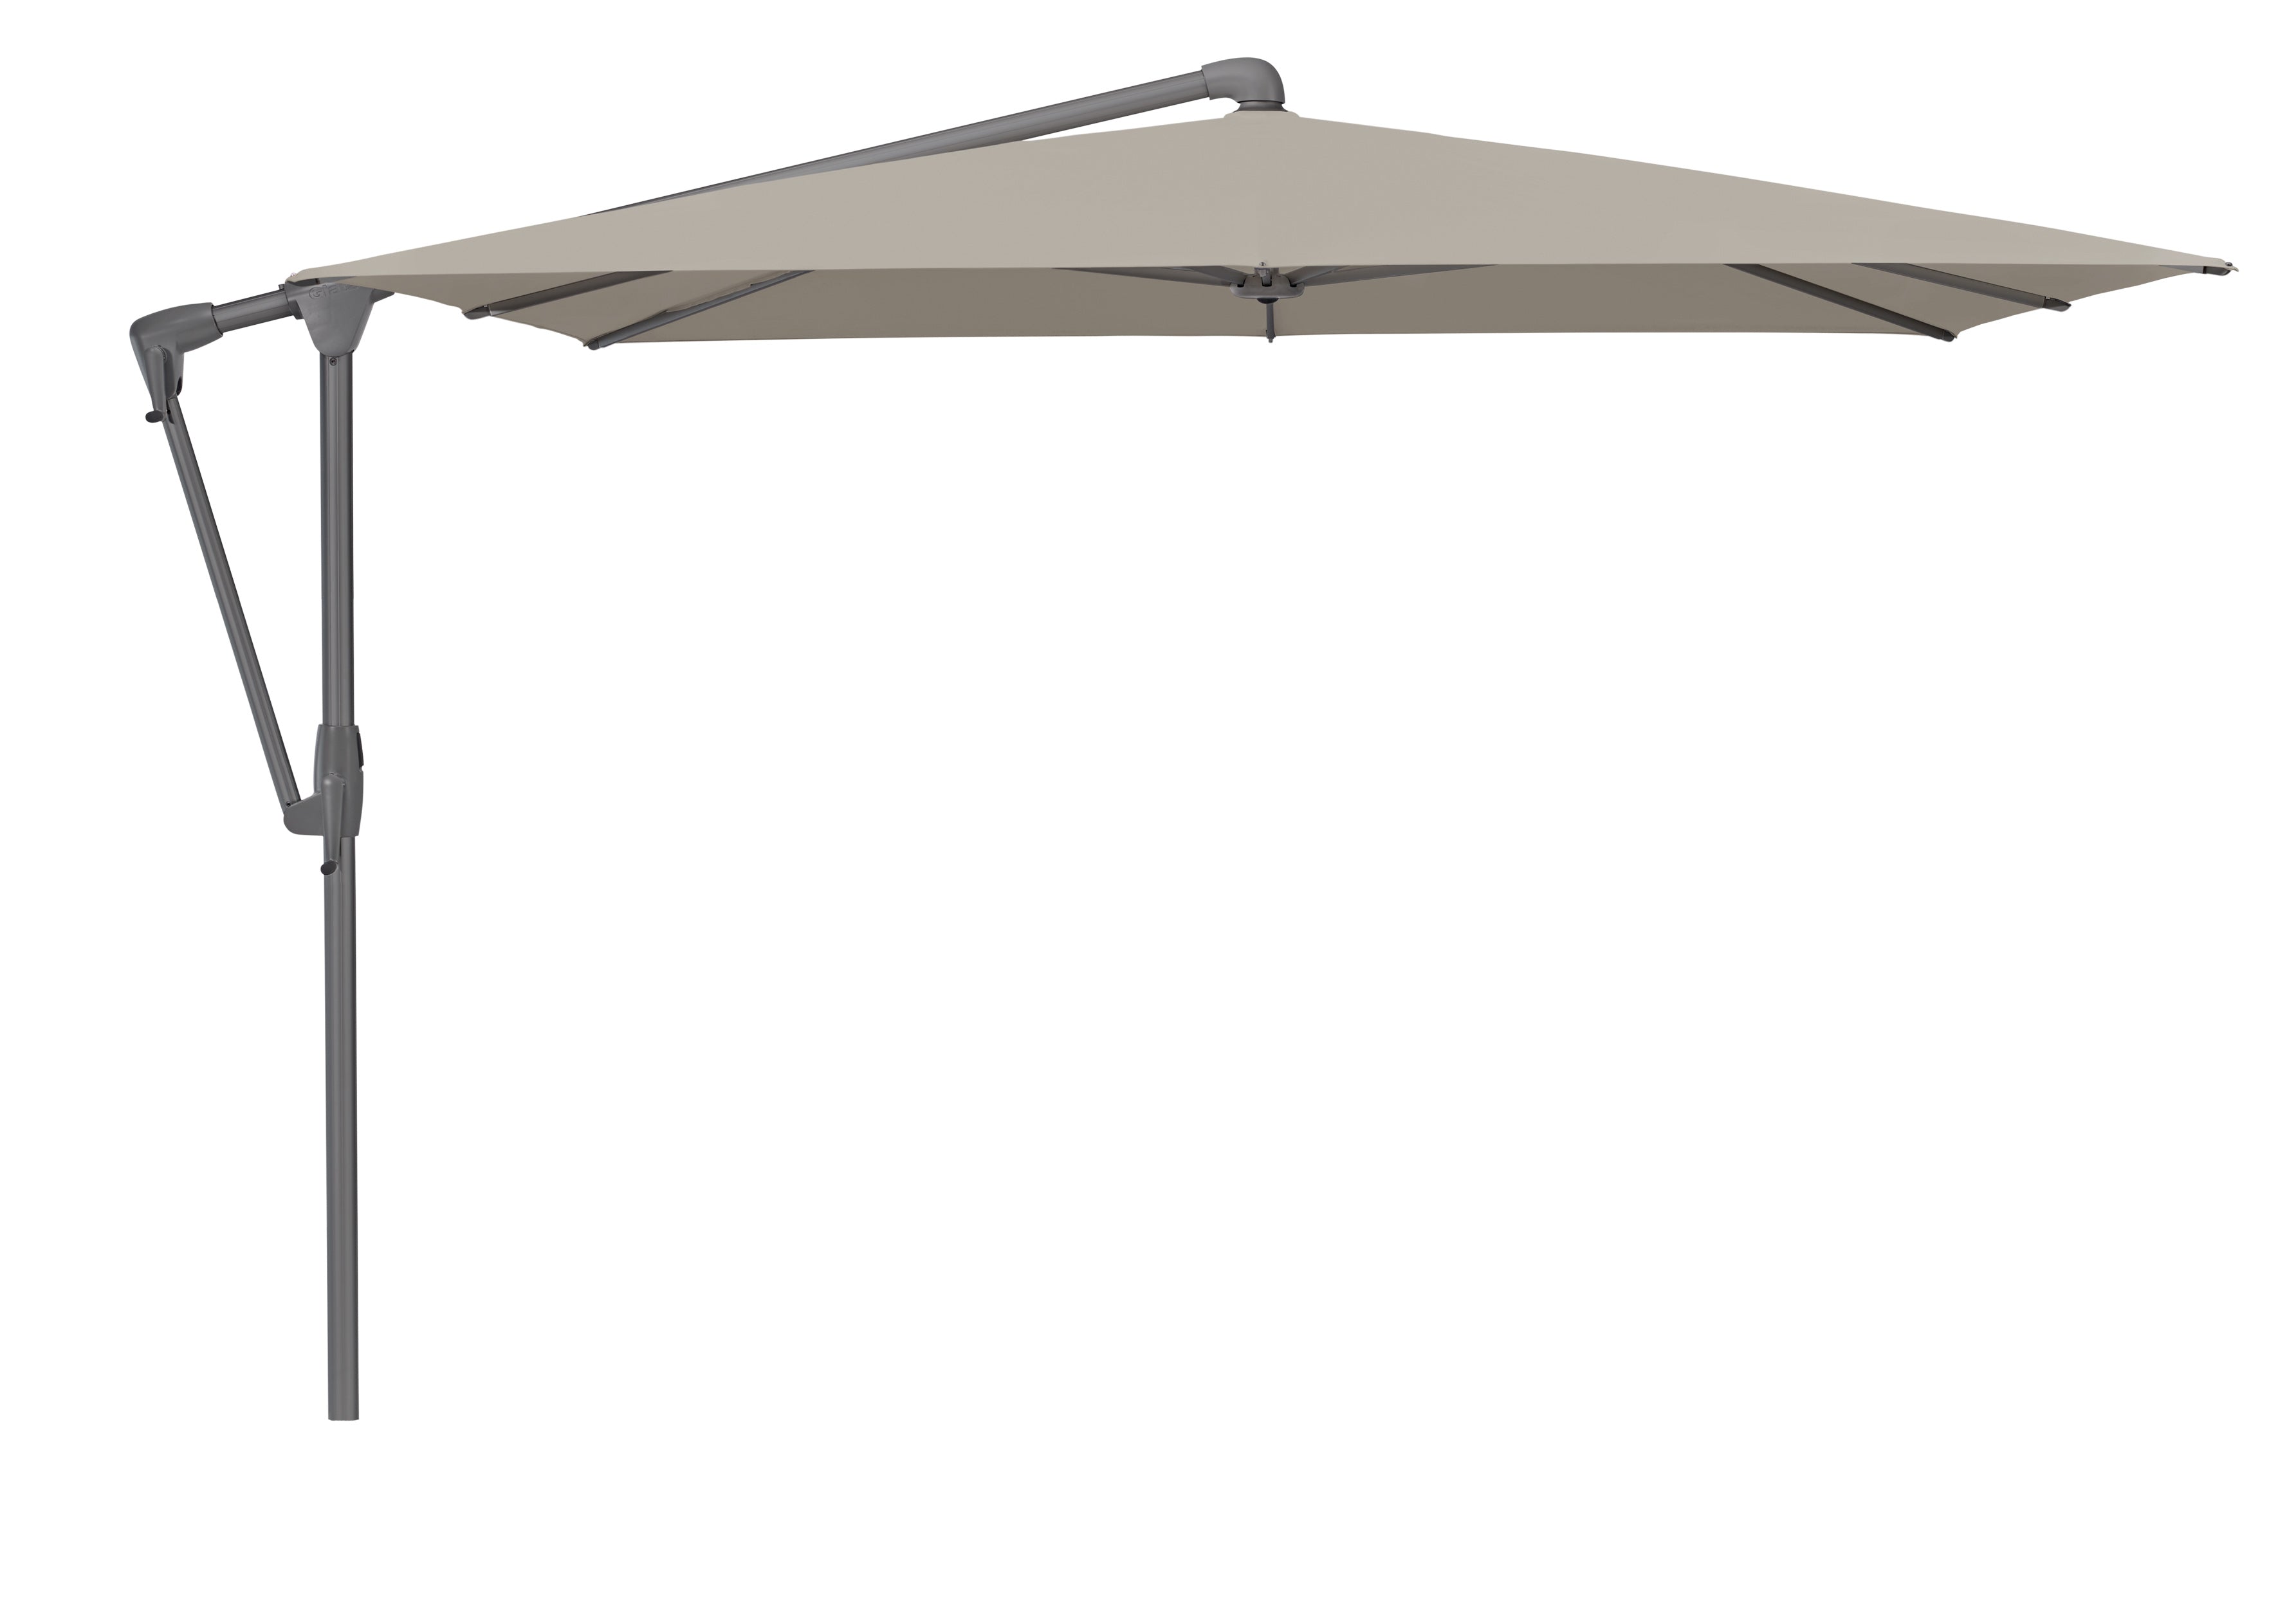 Sunwing 2.7x2.7m Square Taupe Canopy With Liro Moveable Base